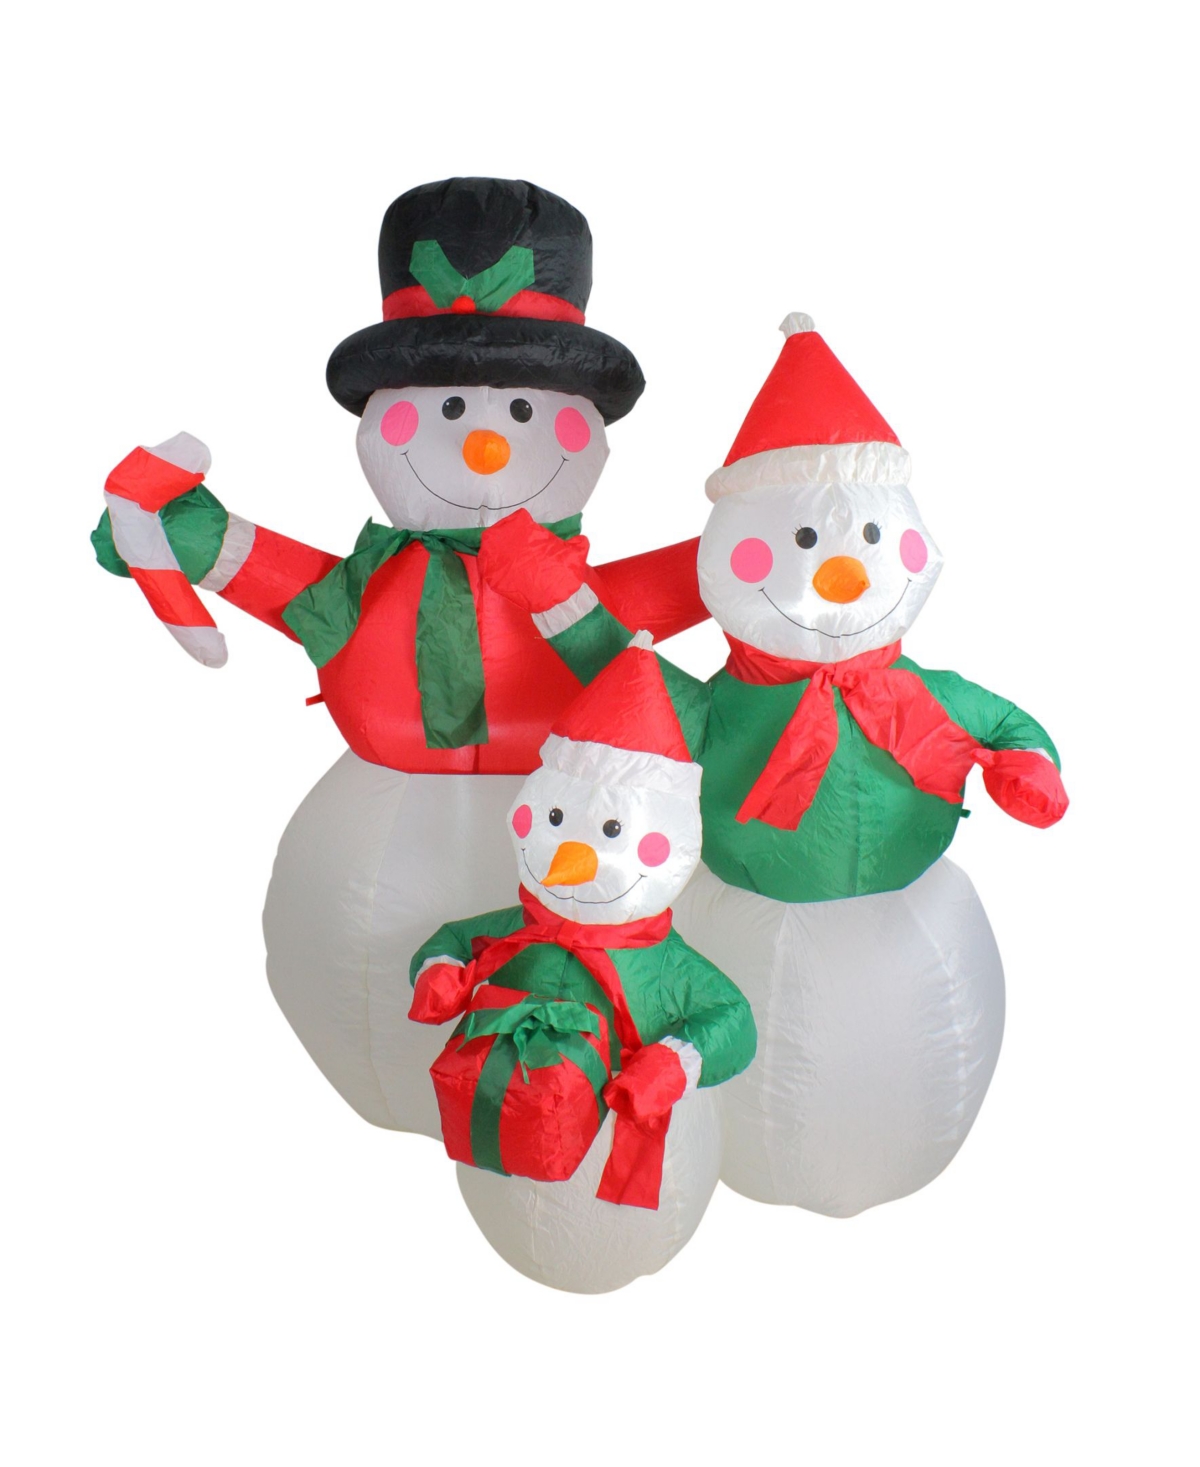 4' Inflatable Snowman Family Lighted Christmas Yard Art Decoration - White